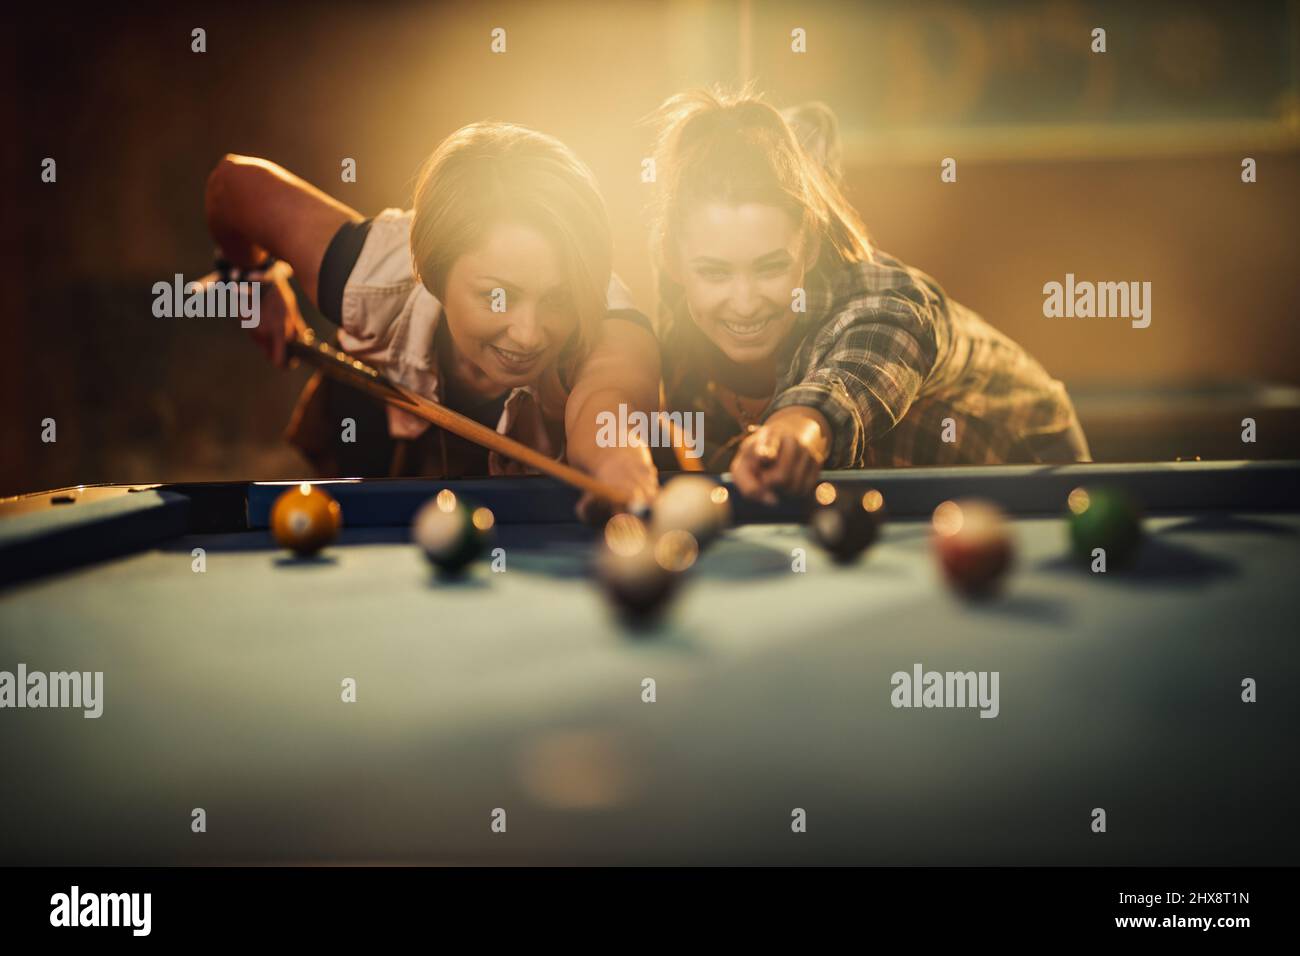 Young smiling cheerful two young women are playing billiards in bar after work. They are involved in recreational activity. Stock Photo